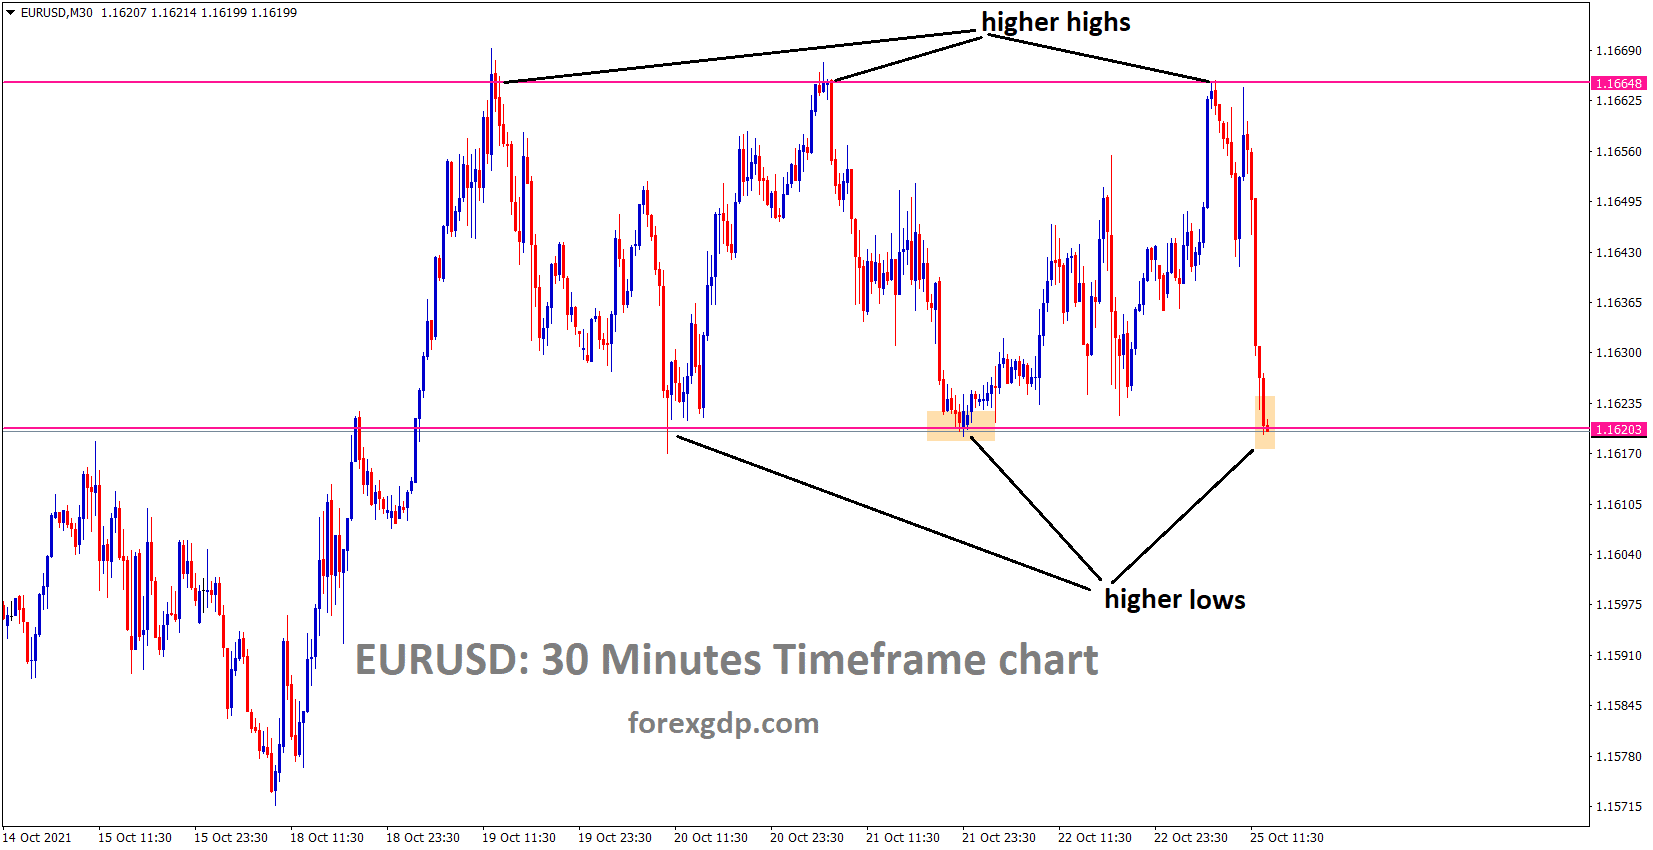 EURUSD is moving in a Box pattern and higher low support area